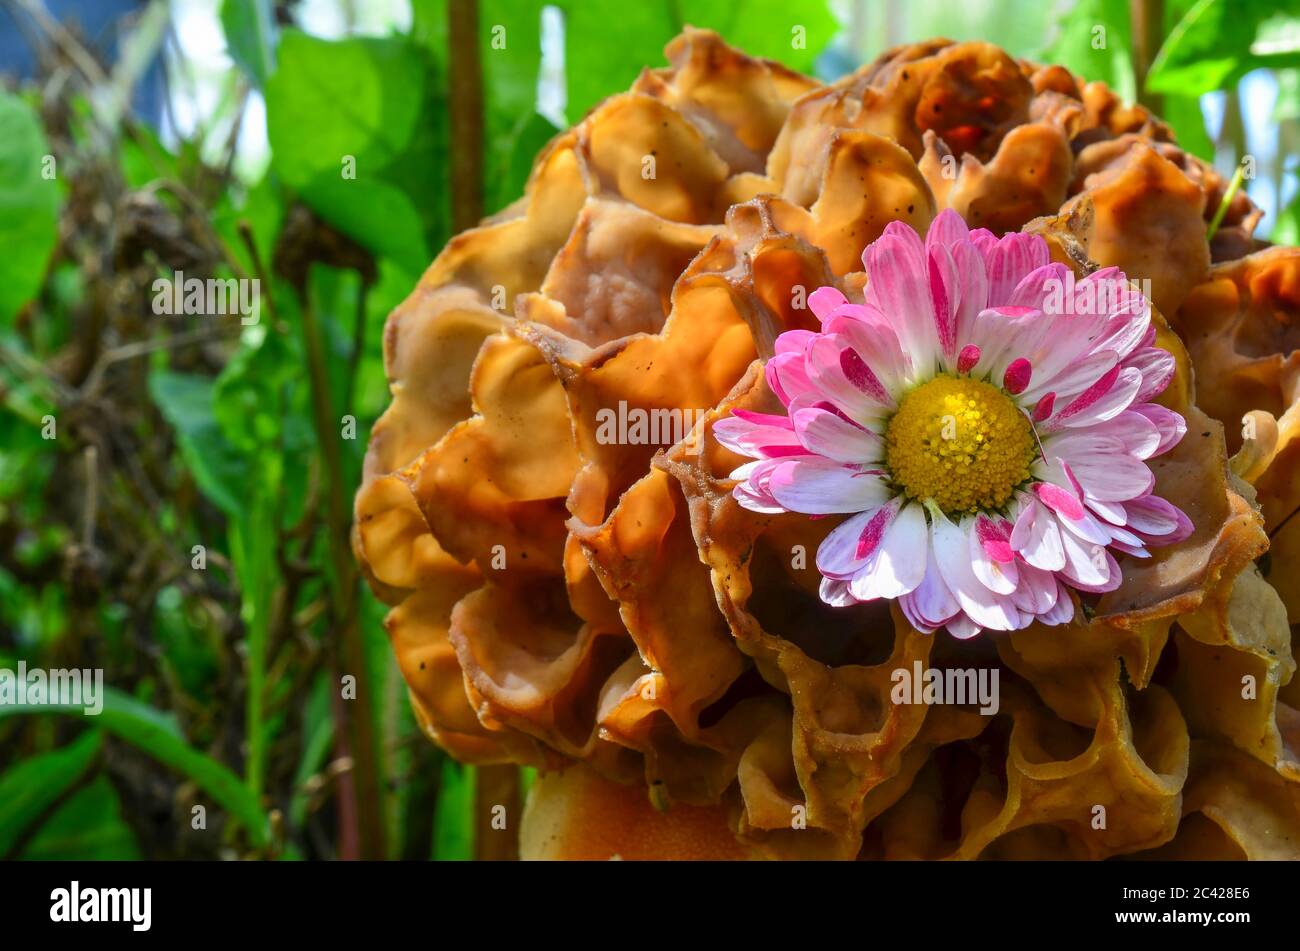 Red and white Daisy flower captured by cap of Common morel or Morchella Esculenta, close up view Stock Photo